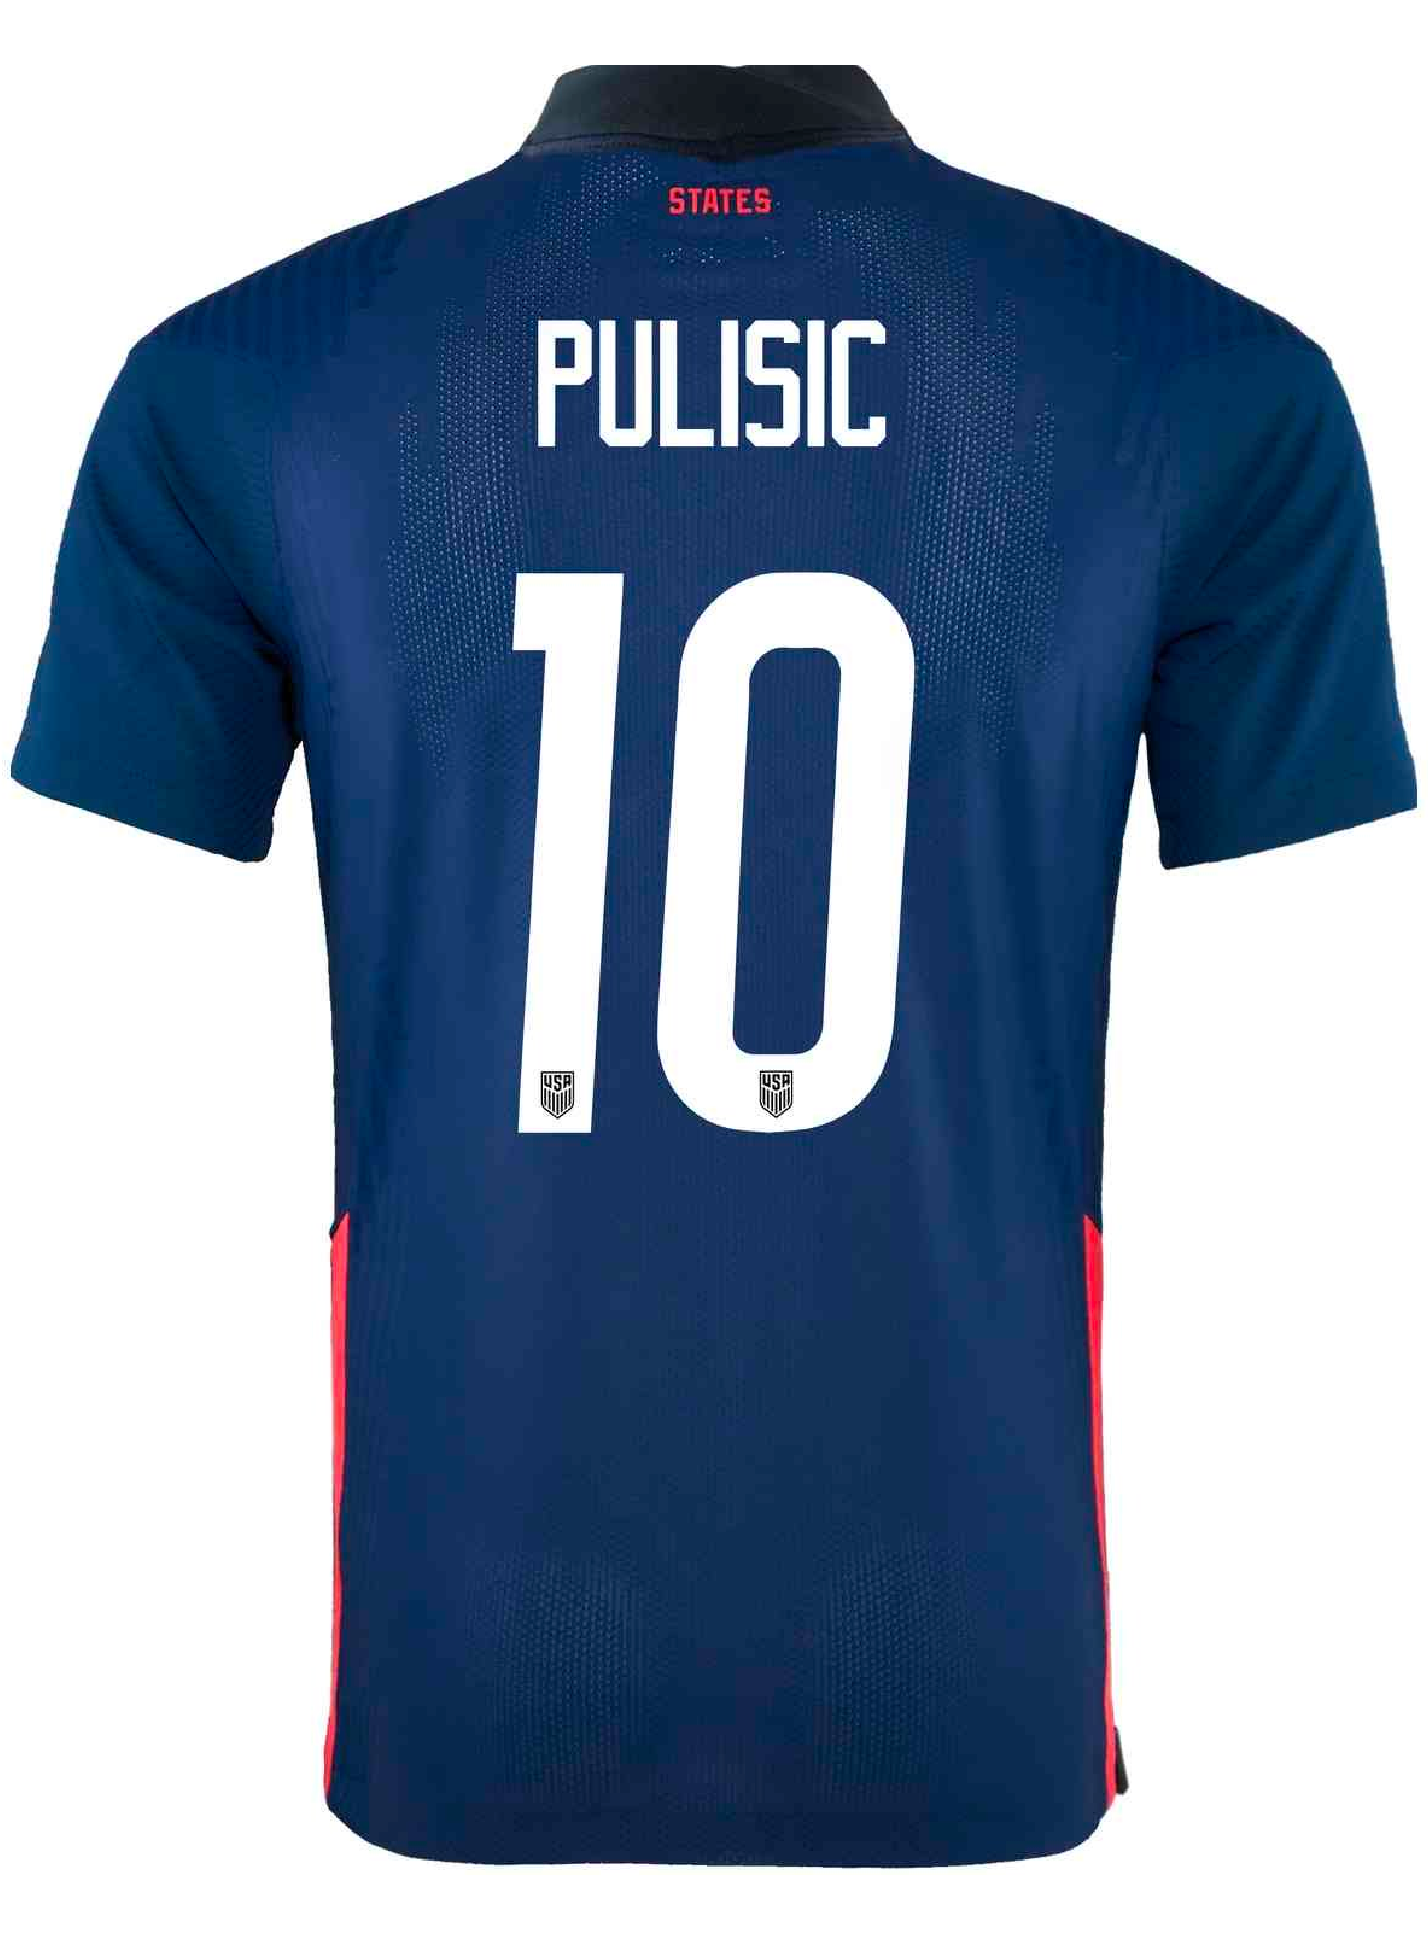 pulisic jersey authentic